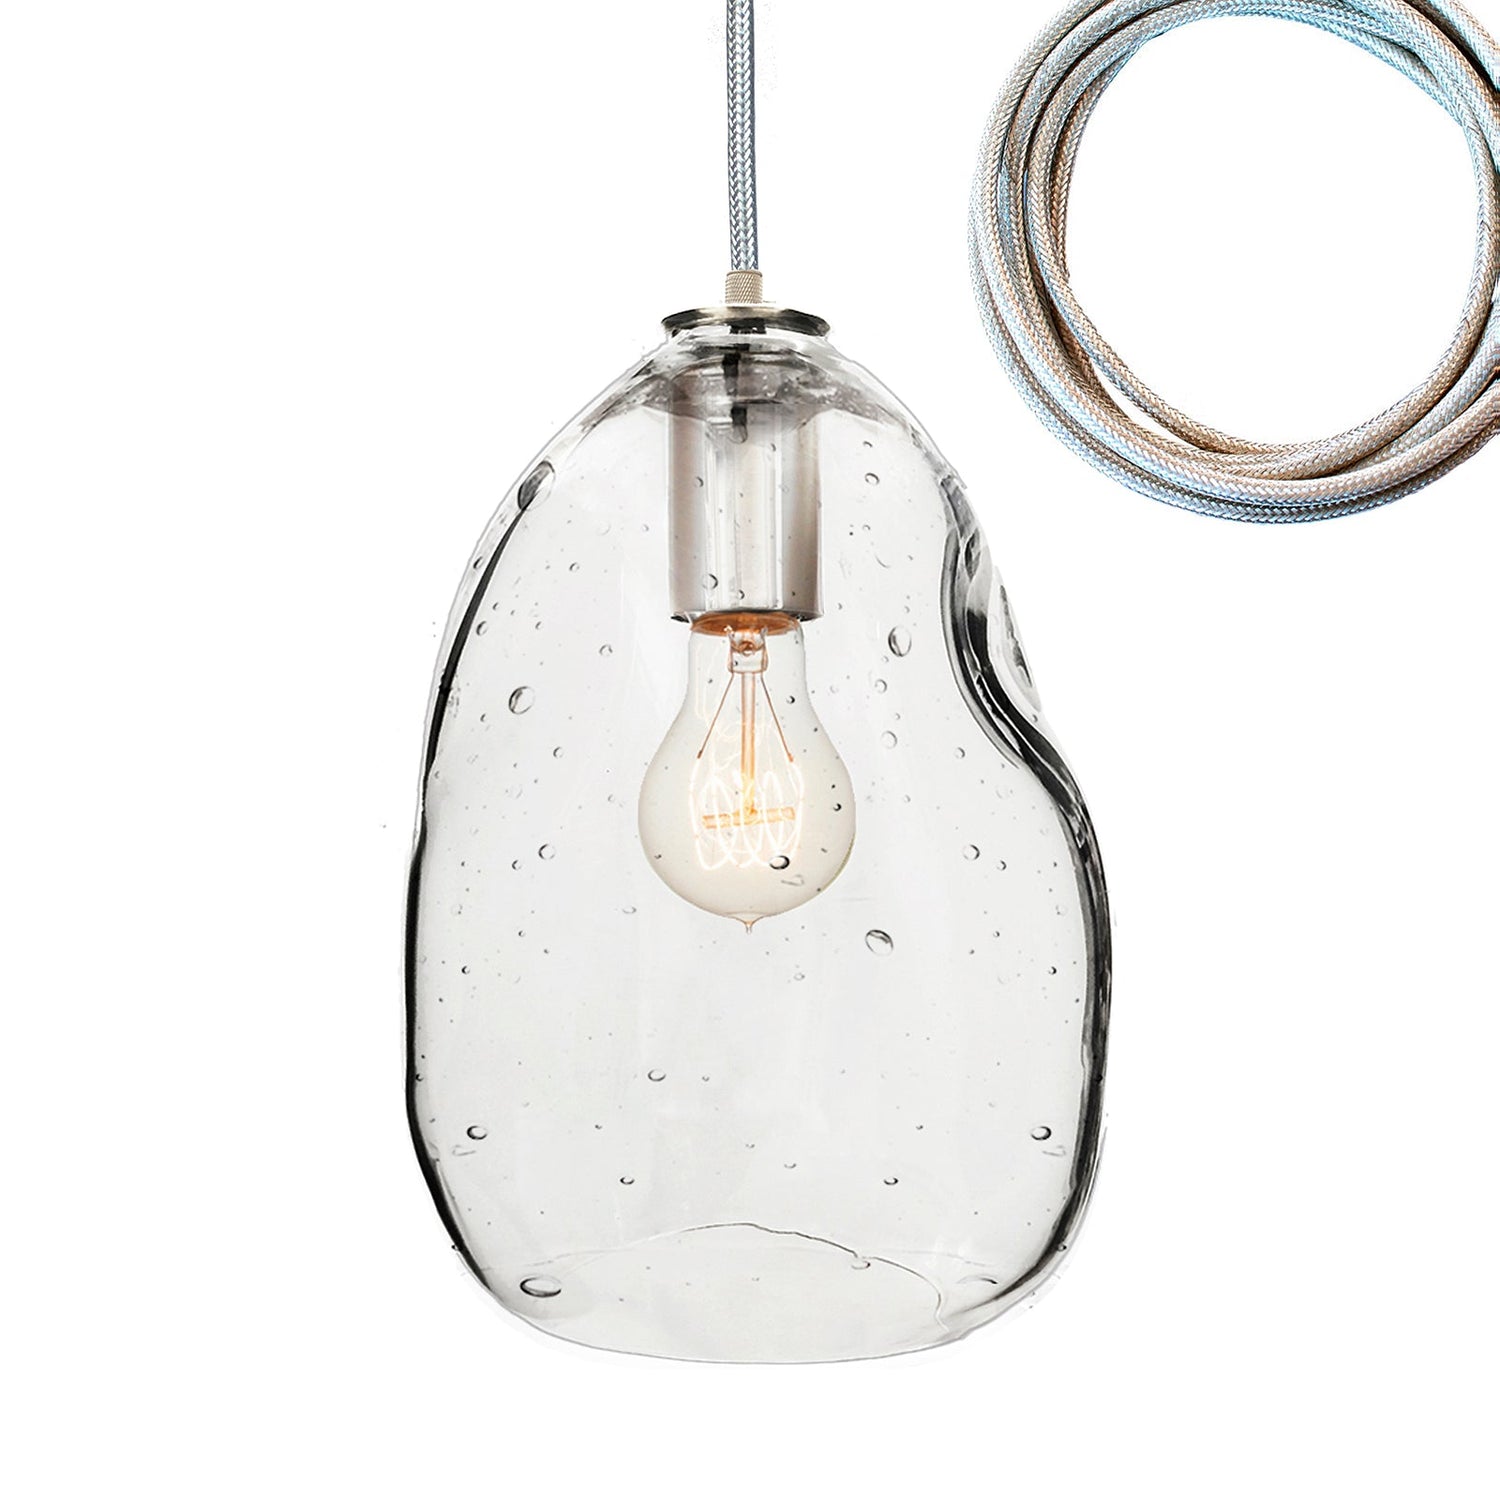 Seedy Bubble Hand Blown Glass and Stagger 7 Light Chandelier